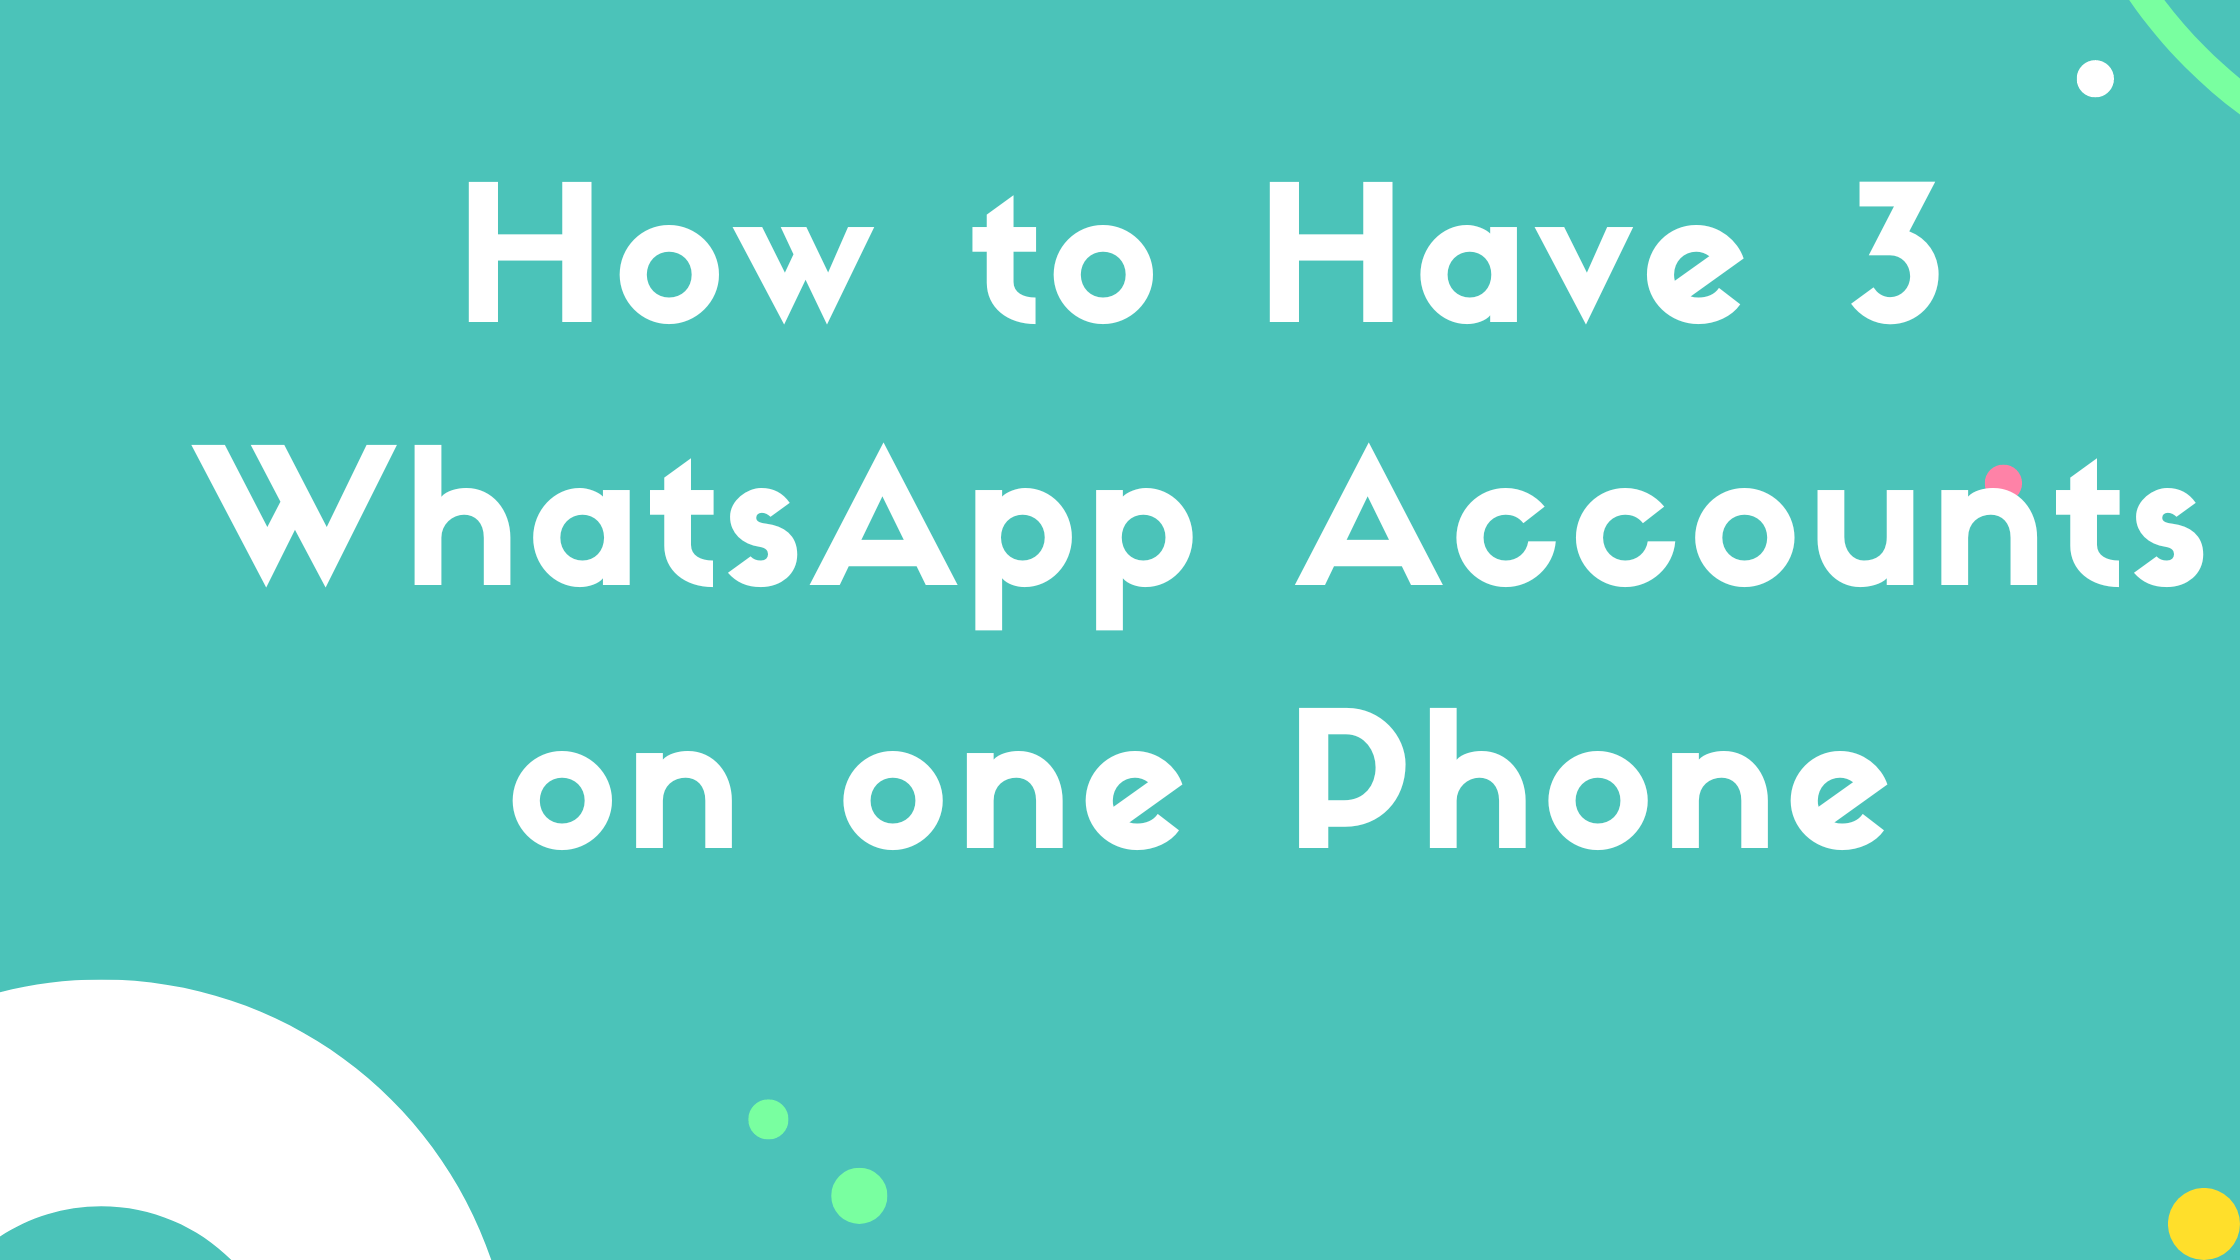 How to Have 3 WhatsApp Accounts on one Phone without Root